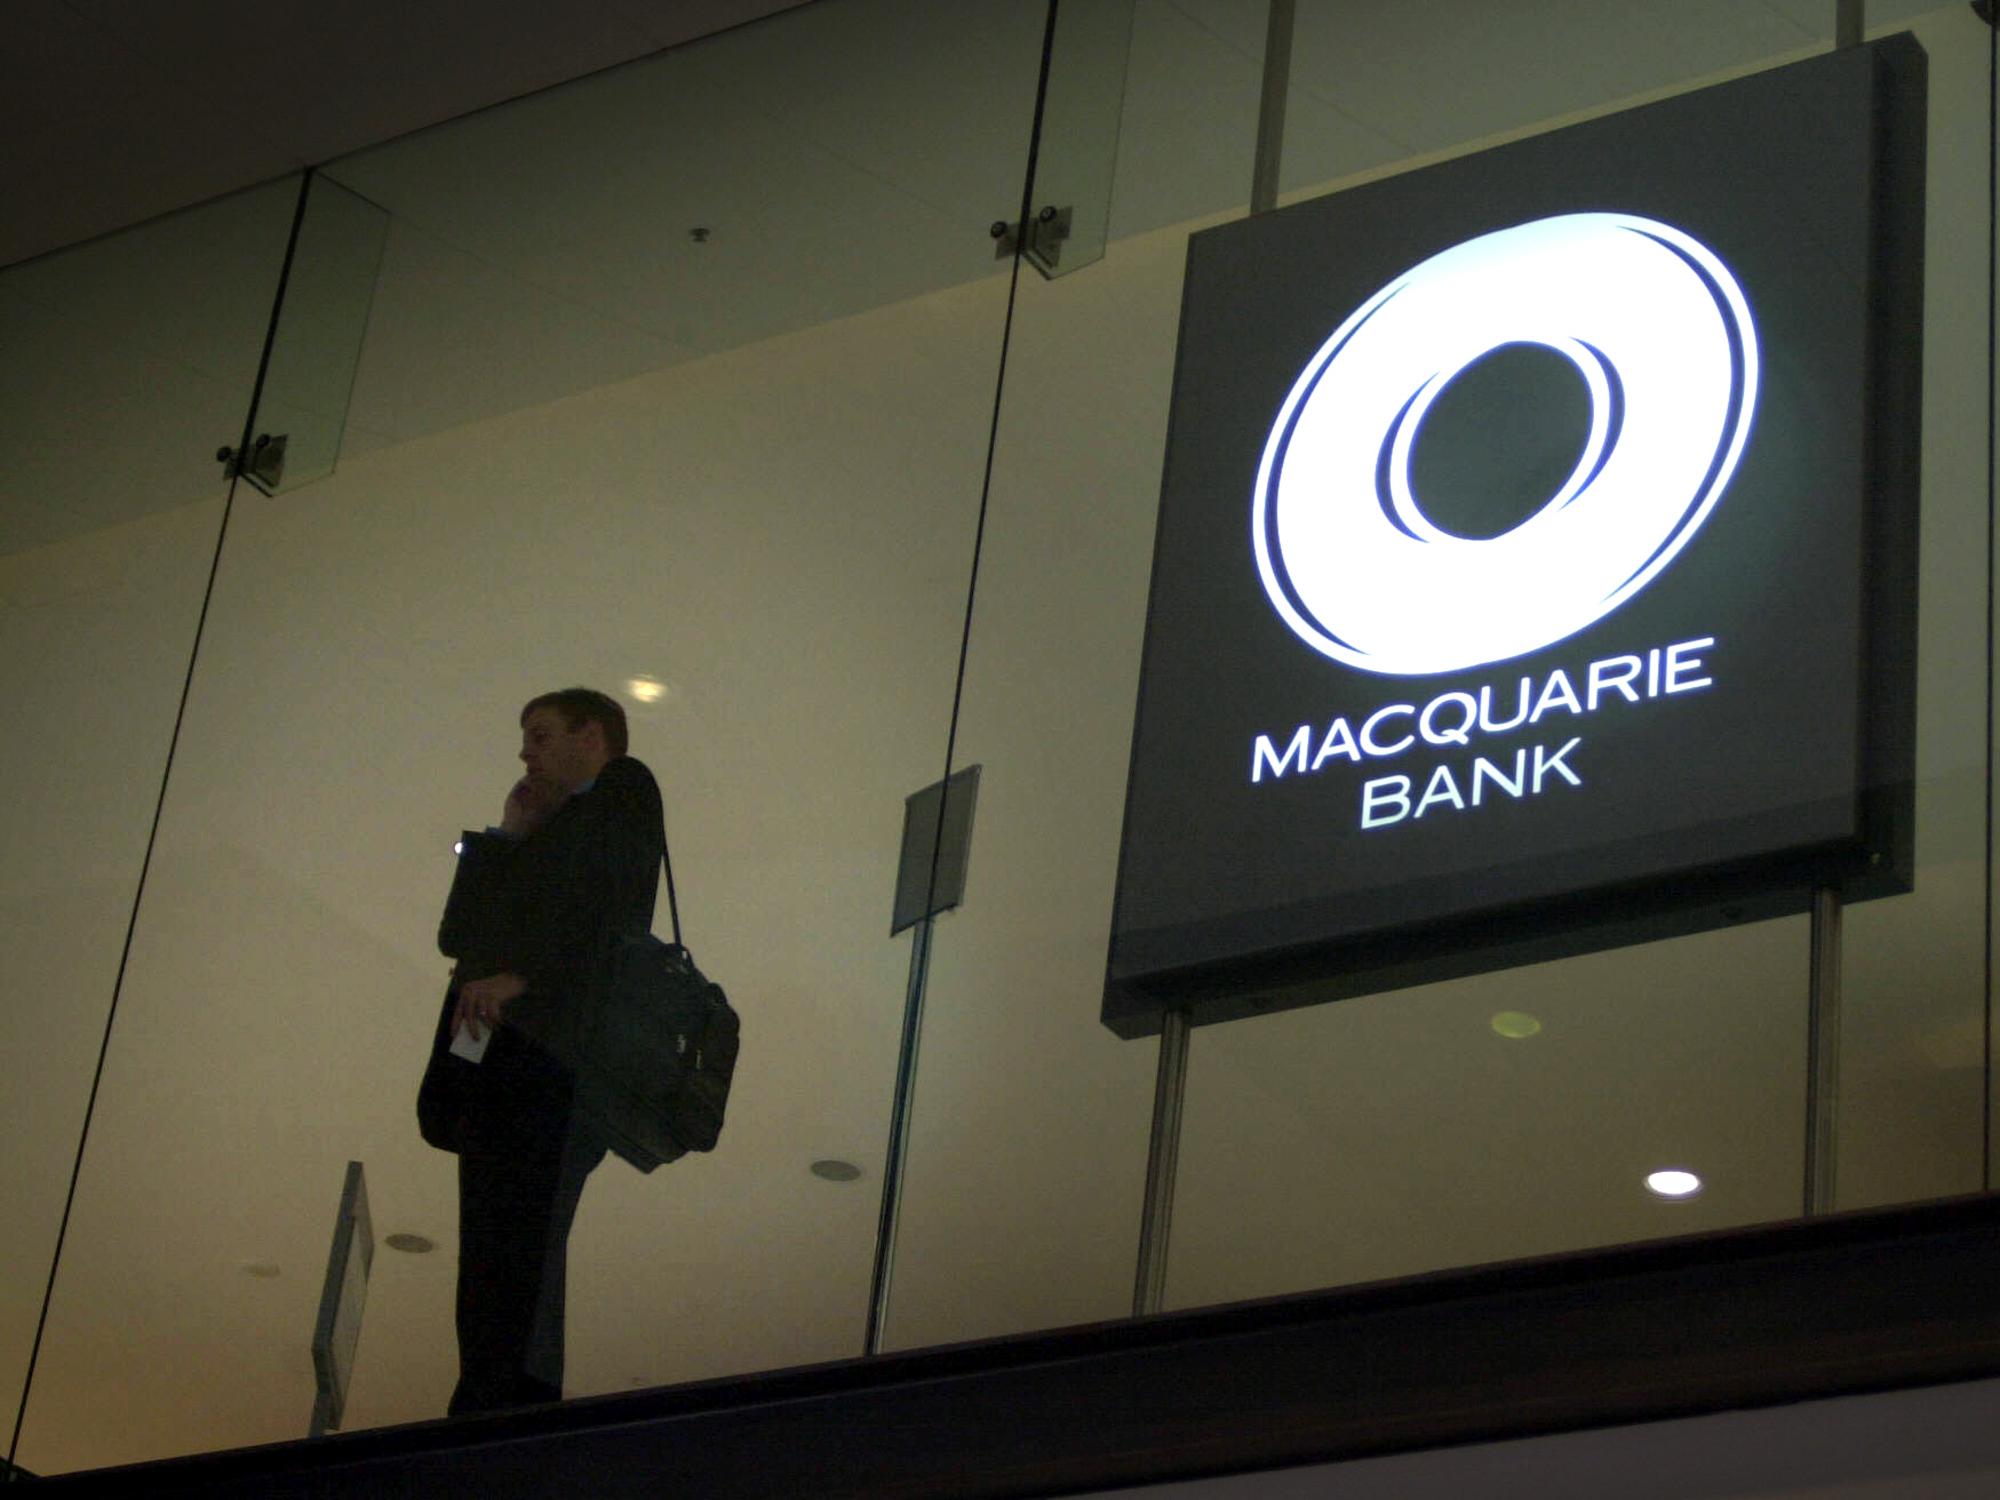 Macquarie bank's office sex, salary party culture revealed The Australian